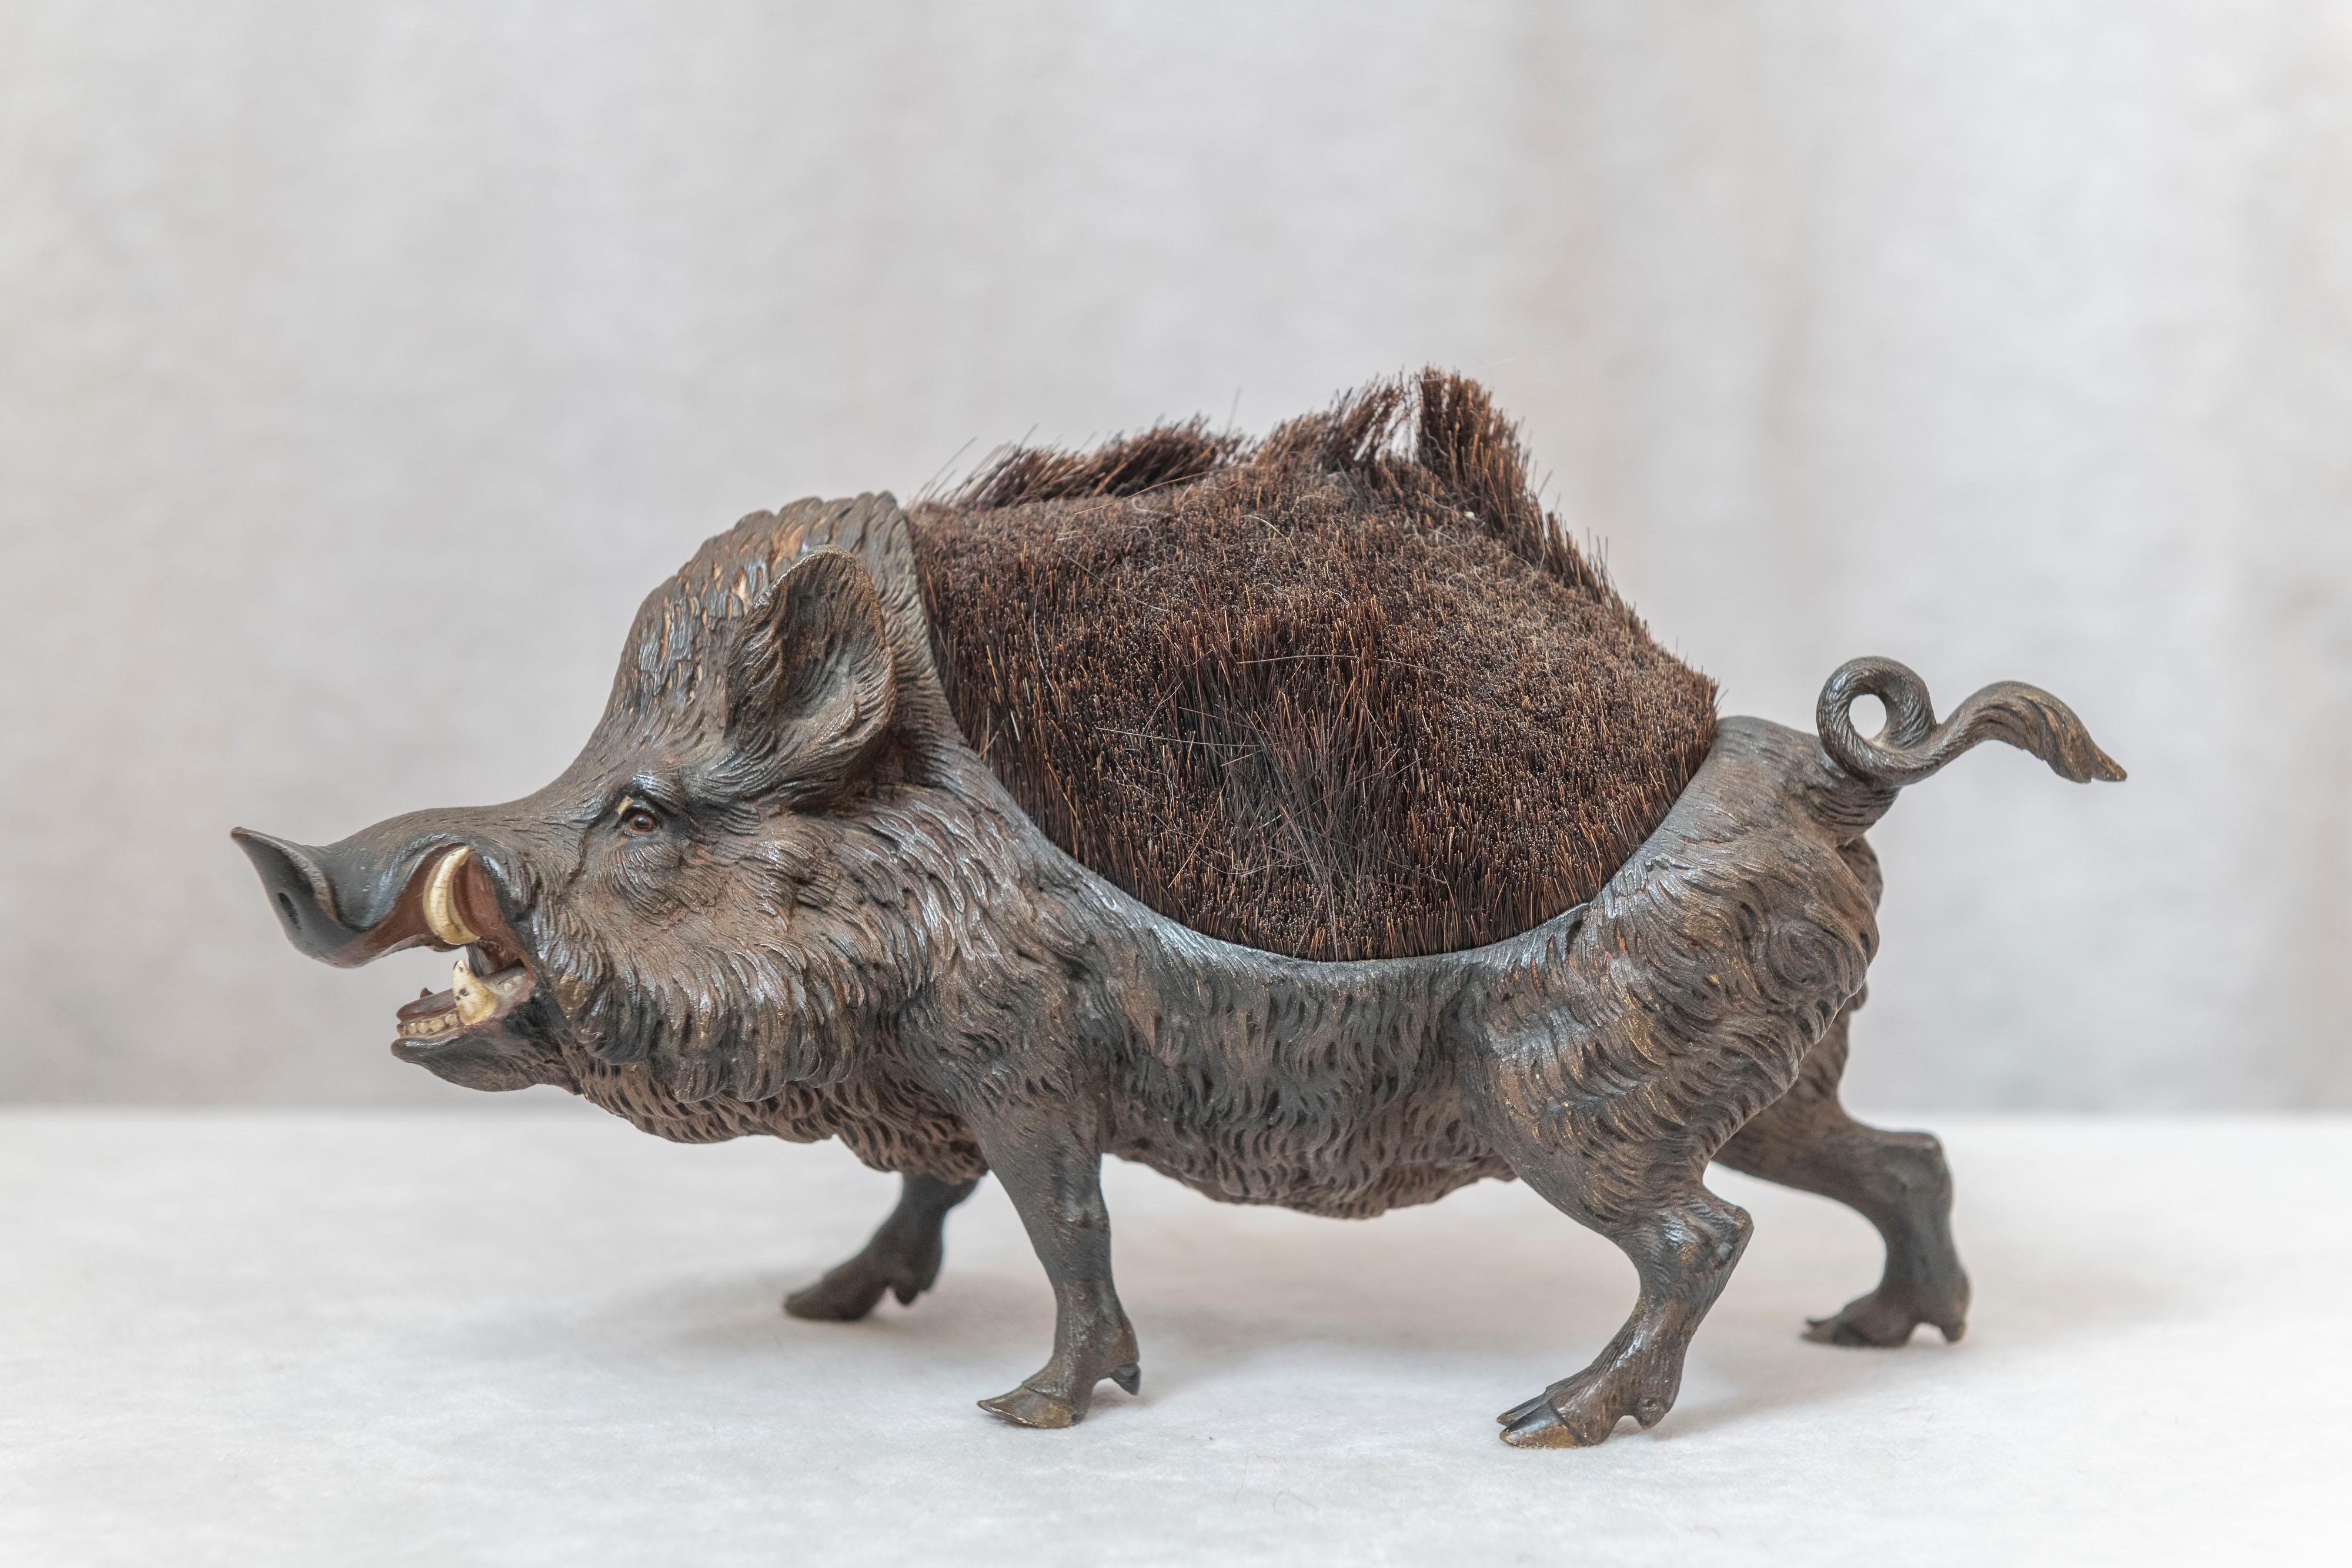 We do carry many Vienna bronzes, and we deeply appreciate their whimsy and quality. This one is a beauty. It is extra large for a Vienna bronze and pays extreme attention to detail, right down to his mouth. The top of the bronze was used for a pen